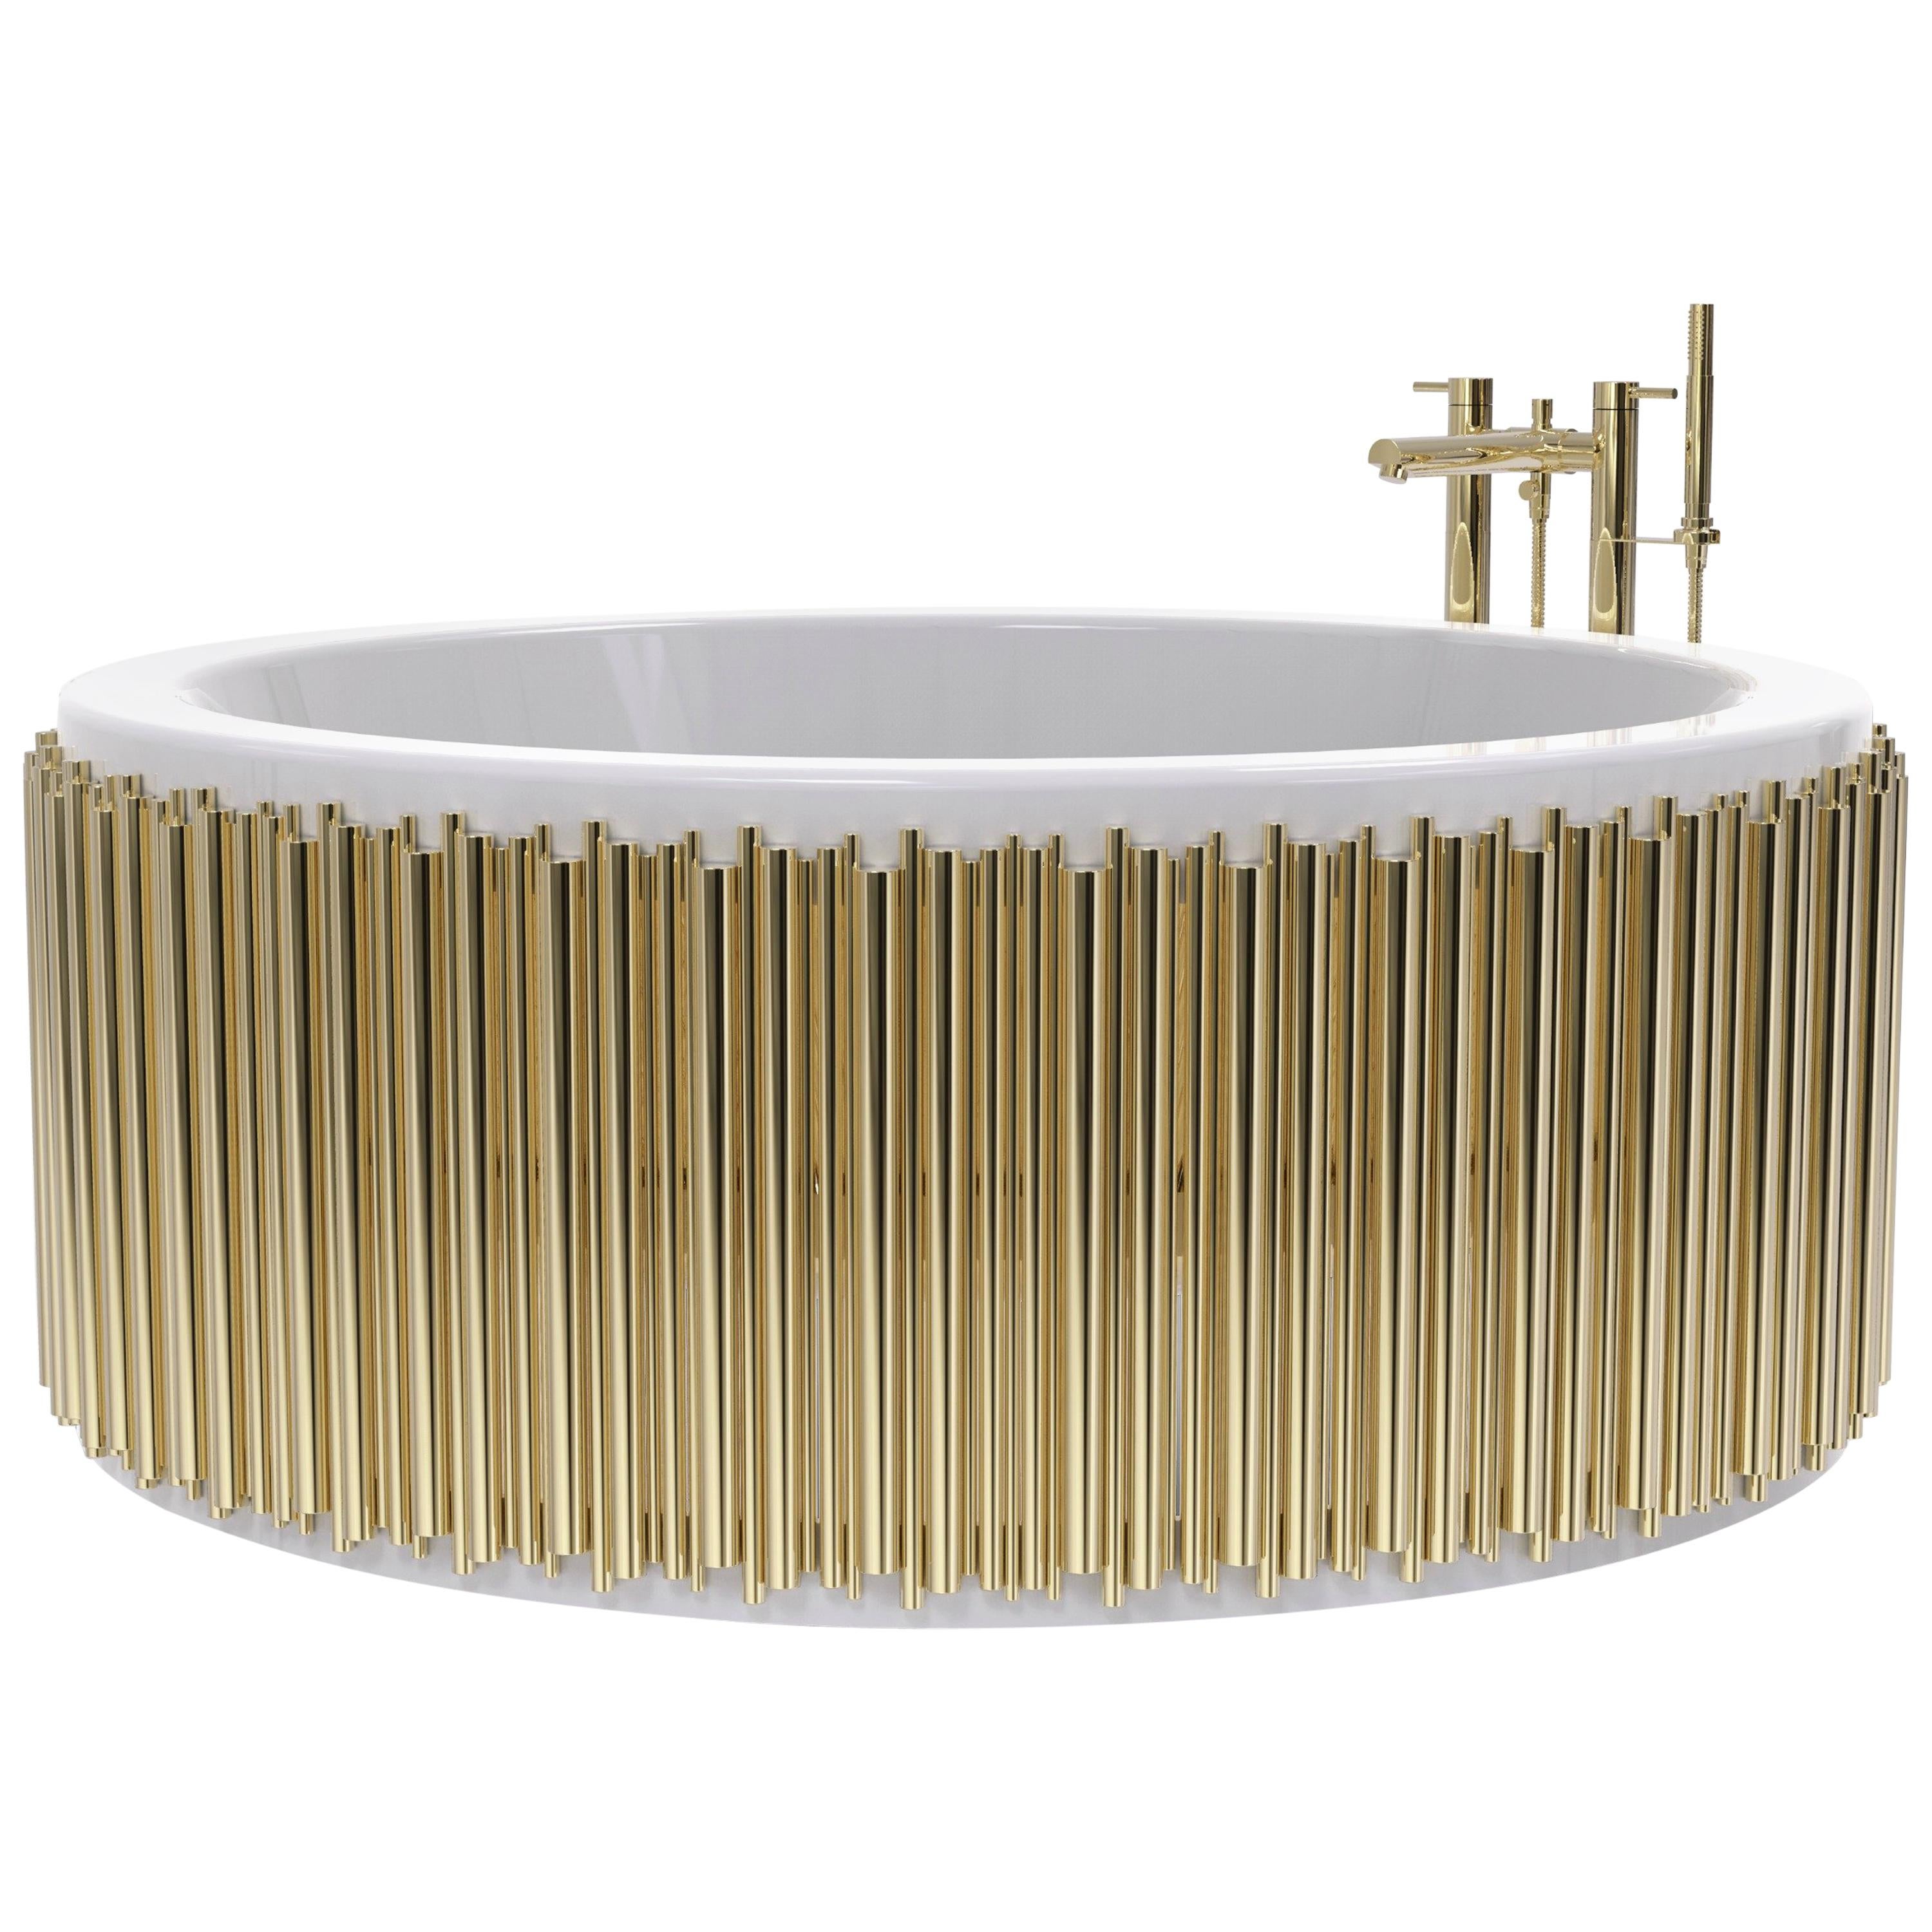 Symphony Bathtub in White with Gold Brass Details